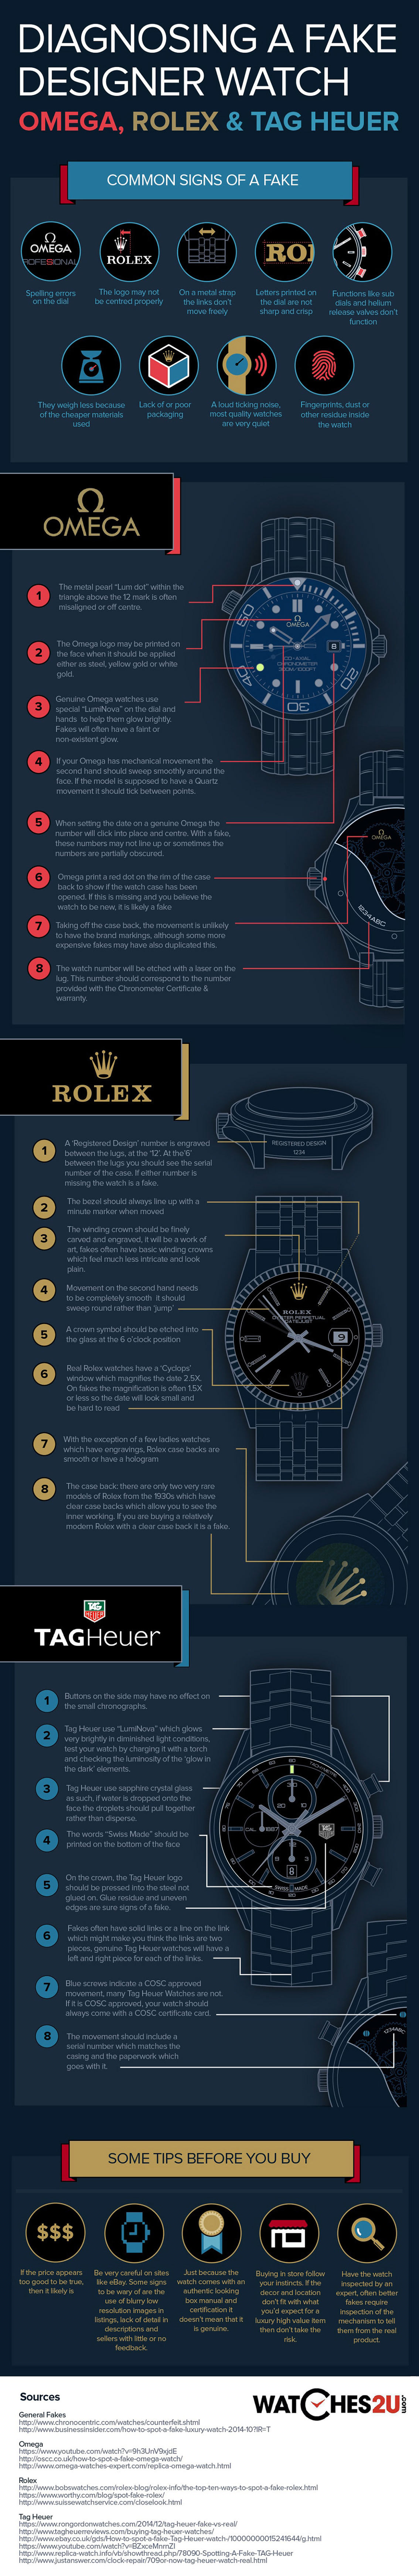 How to Tell if a Rolex Omega and Tag Heuer Watch is Fake Infographic